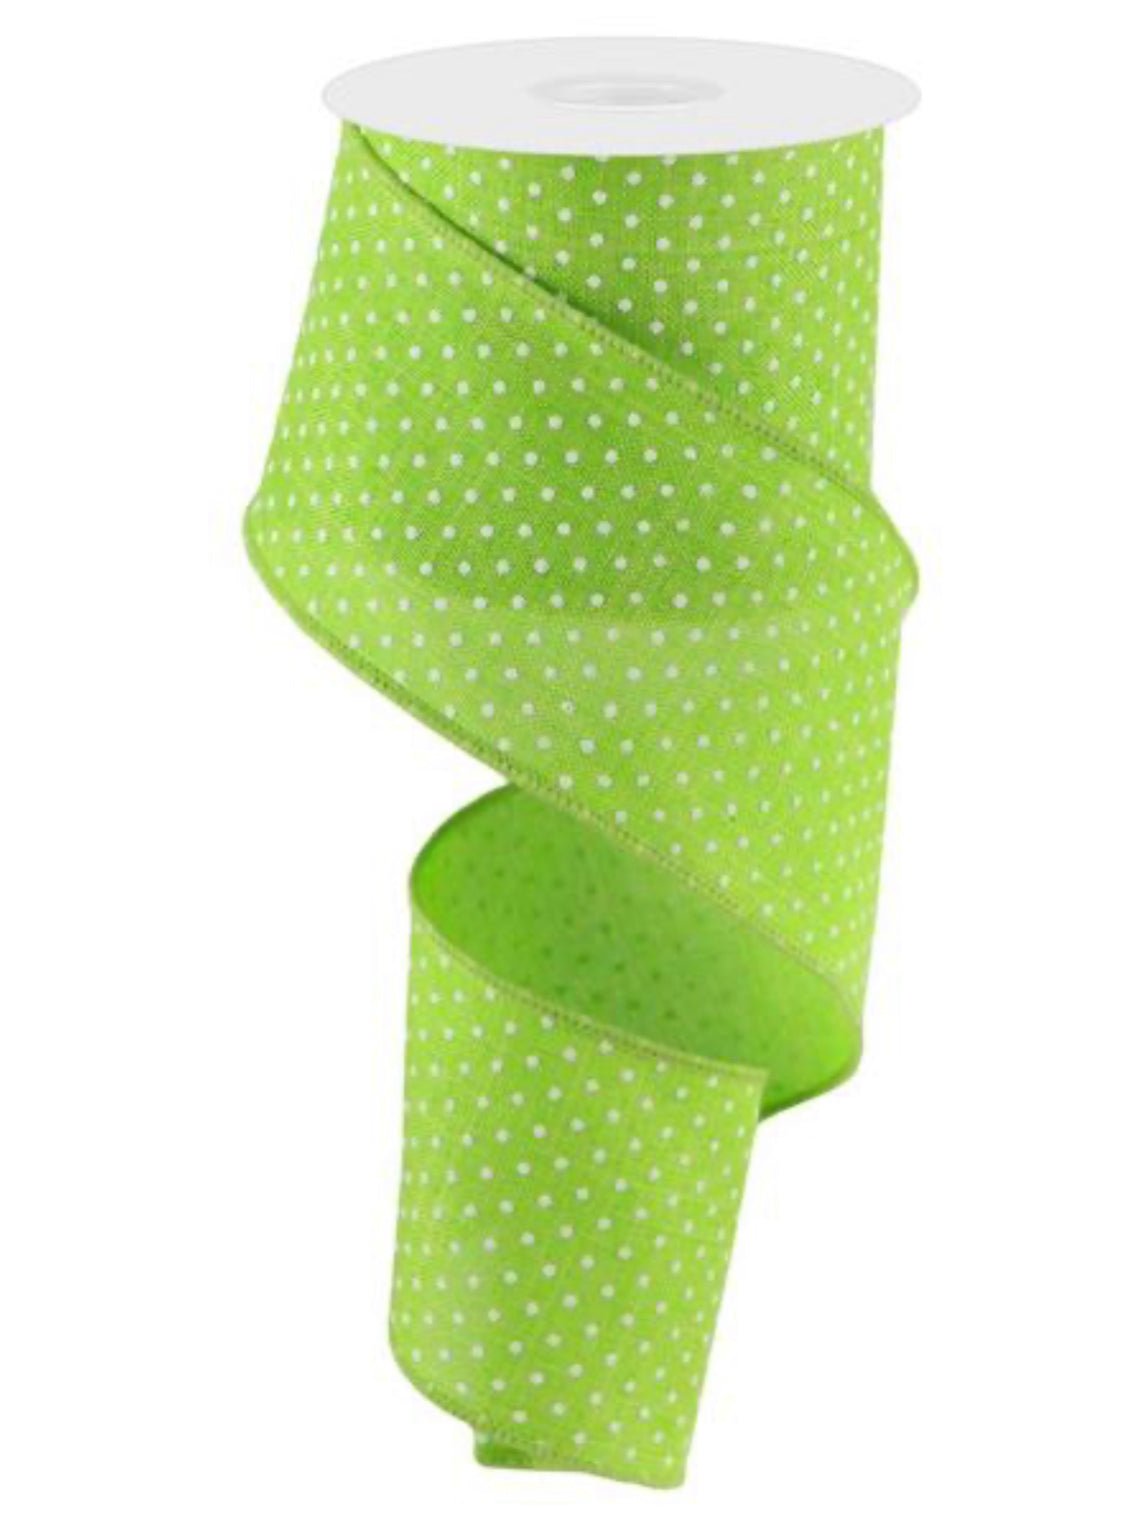 Lime green and white Swiss dots on royal 2.5” - Greenery MarketWired ribbonRG0165233